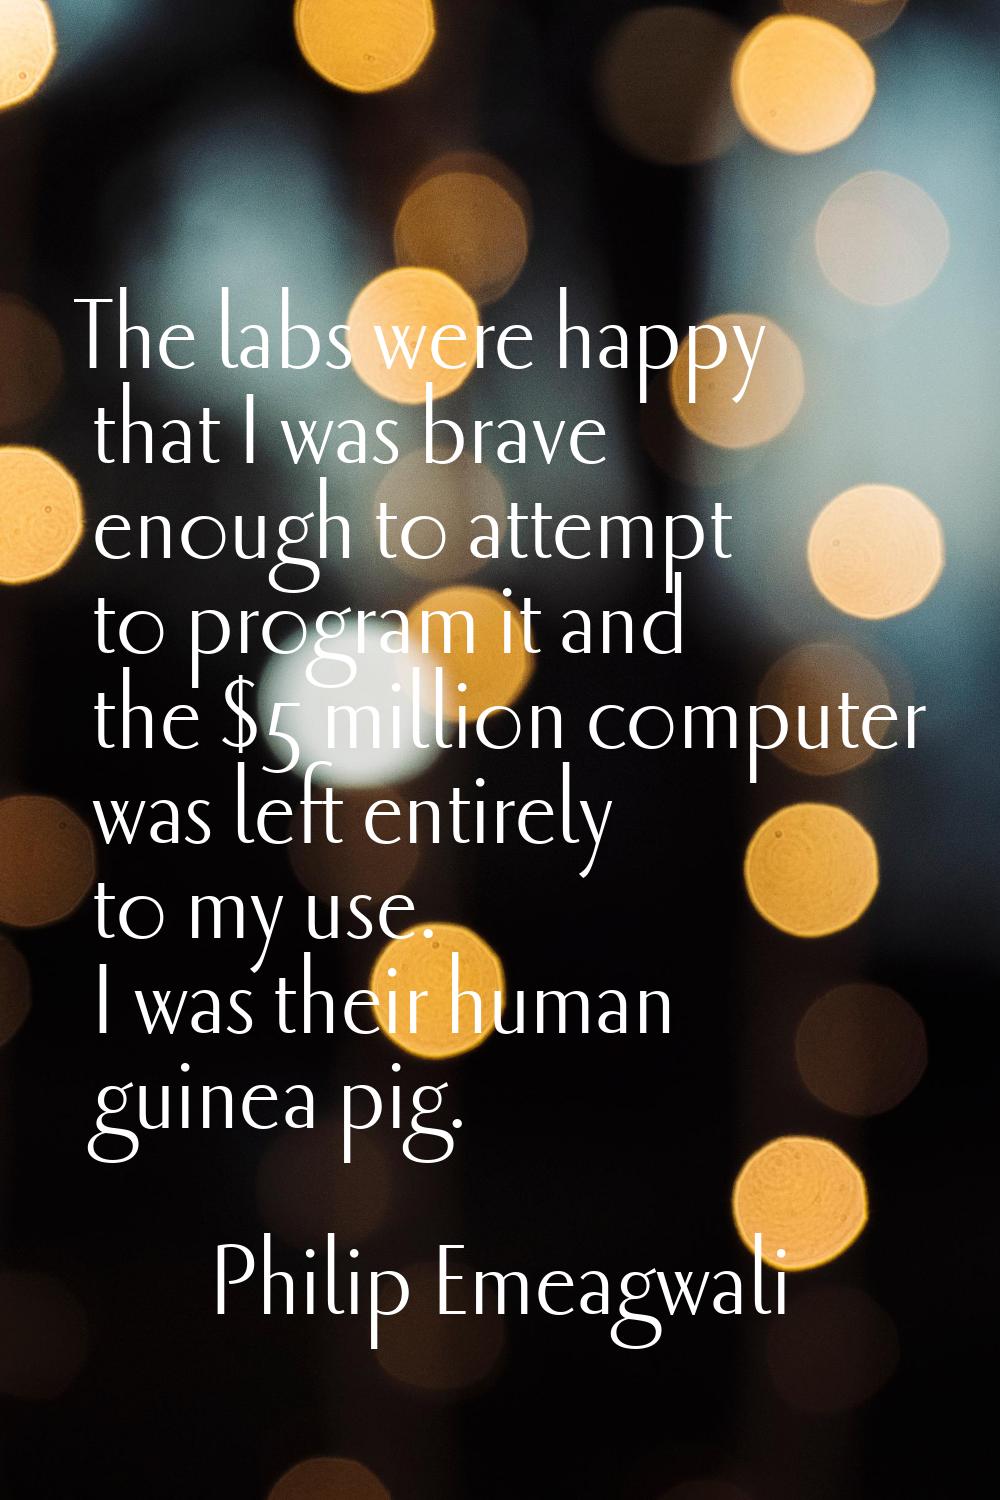 The labs were happy that I was brave enough to attempt to program it and the $5 million computer wa